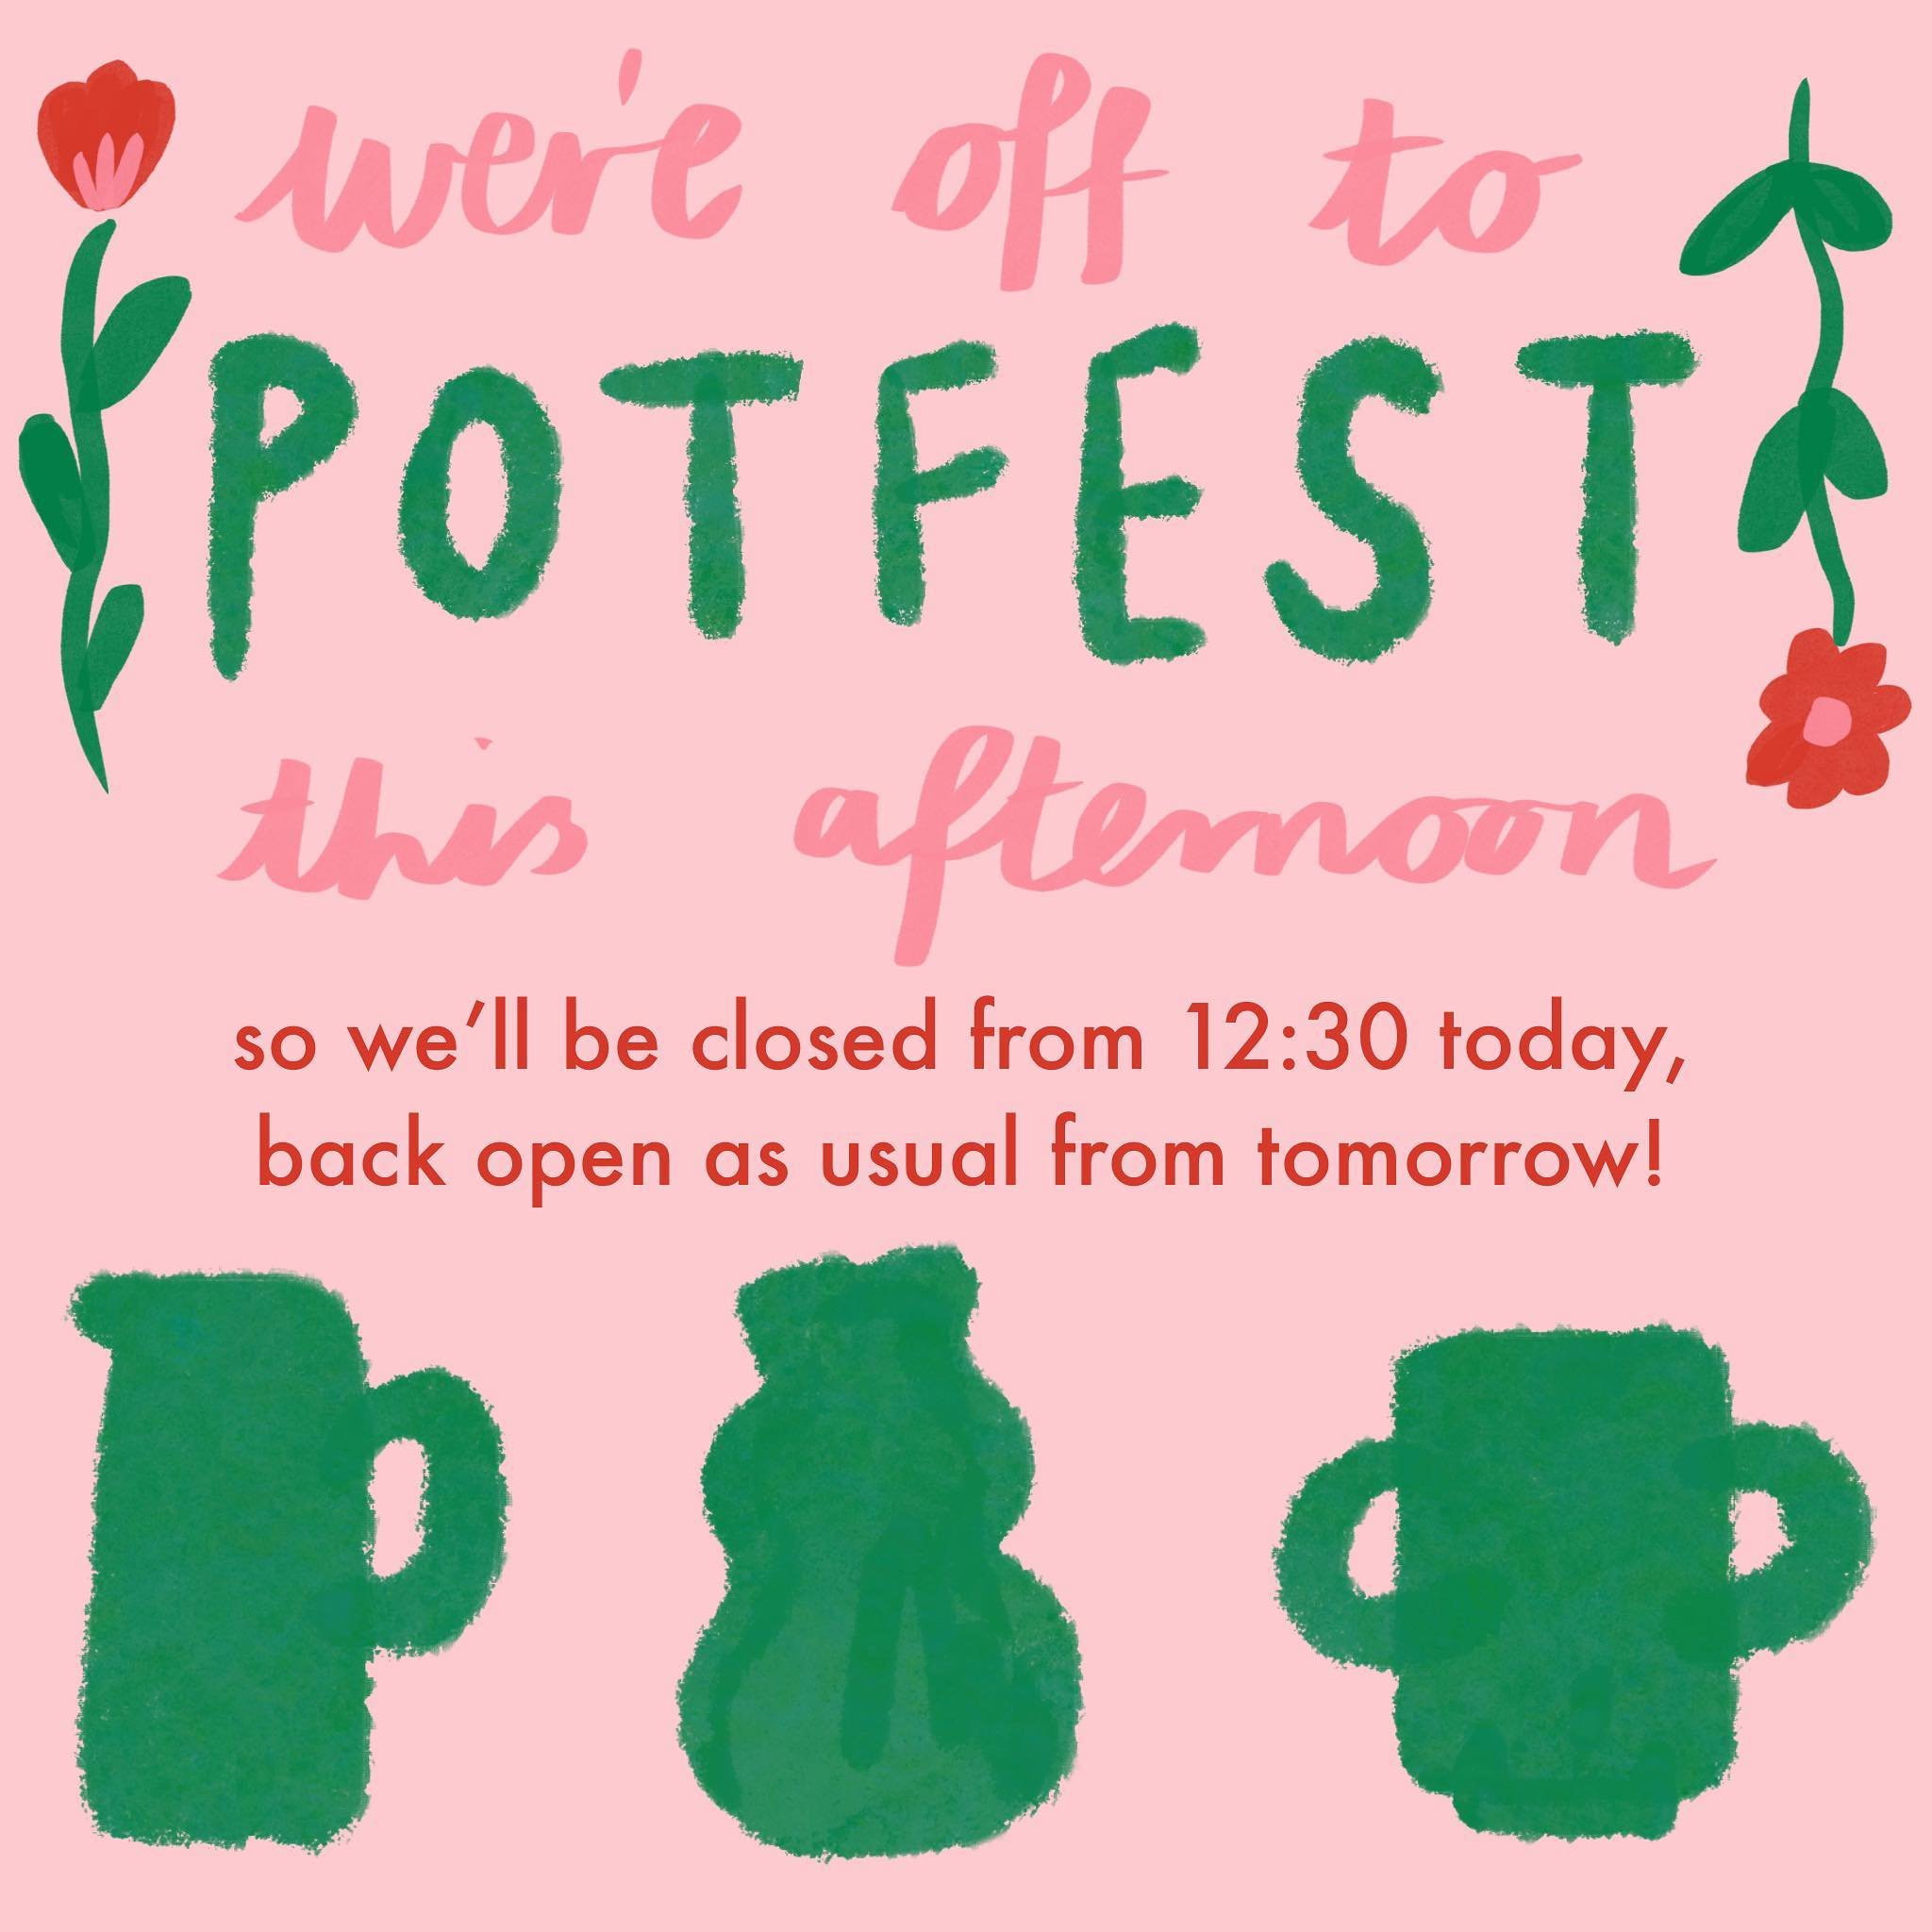 Potfest! 🏺this has been on our website and google hours for over a month but thought we should share it here as a reminder today for anyone planning to come collect pottery, come before 12:30! It&rsquo;s our cute springtime teambuilding day out to s